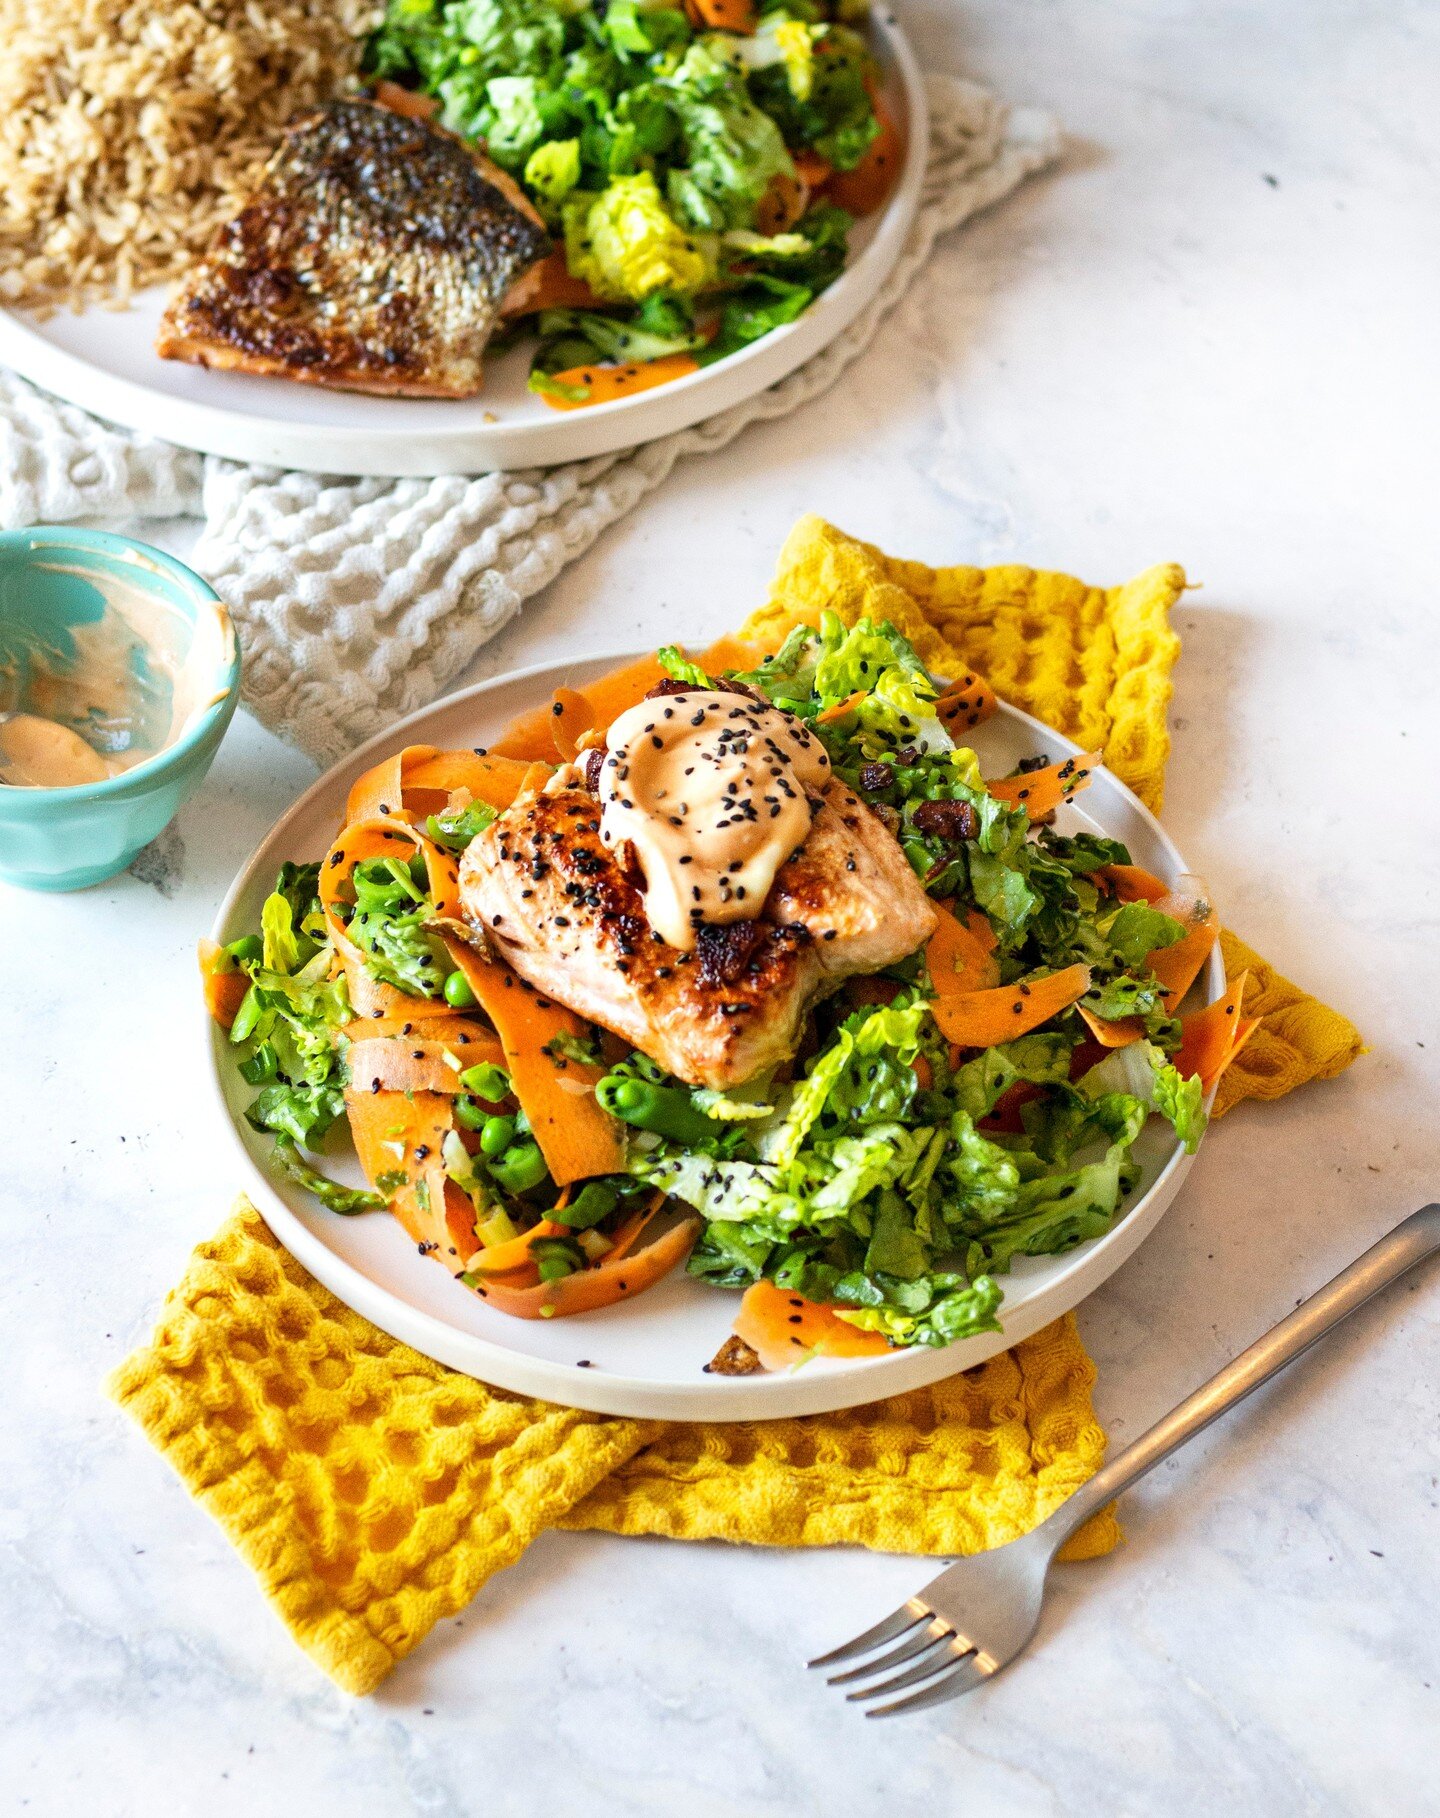 Fresh and zesty salad inspo 🙌 with salmon (+ homemade sriracha mayo - @hunterandgatheruk ) 

The EASIEST, quickest way to make a salad you actually want to eat, is to chop all your veggies, throw them into a bowl with lemon or lime juice and a lug o